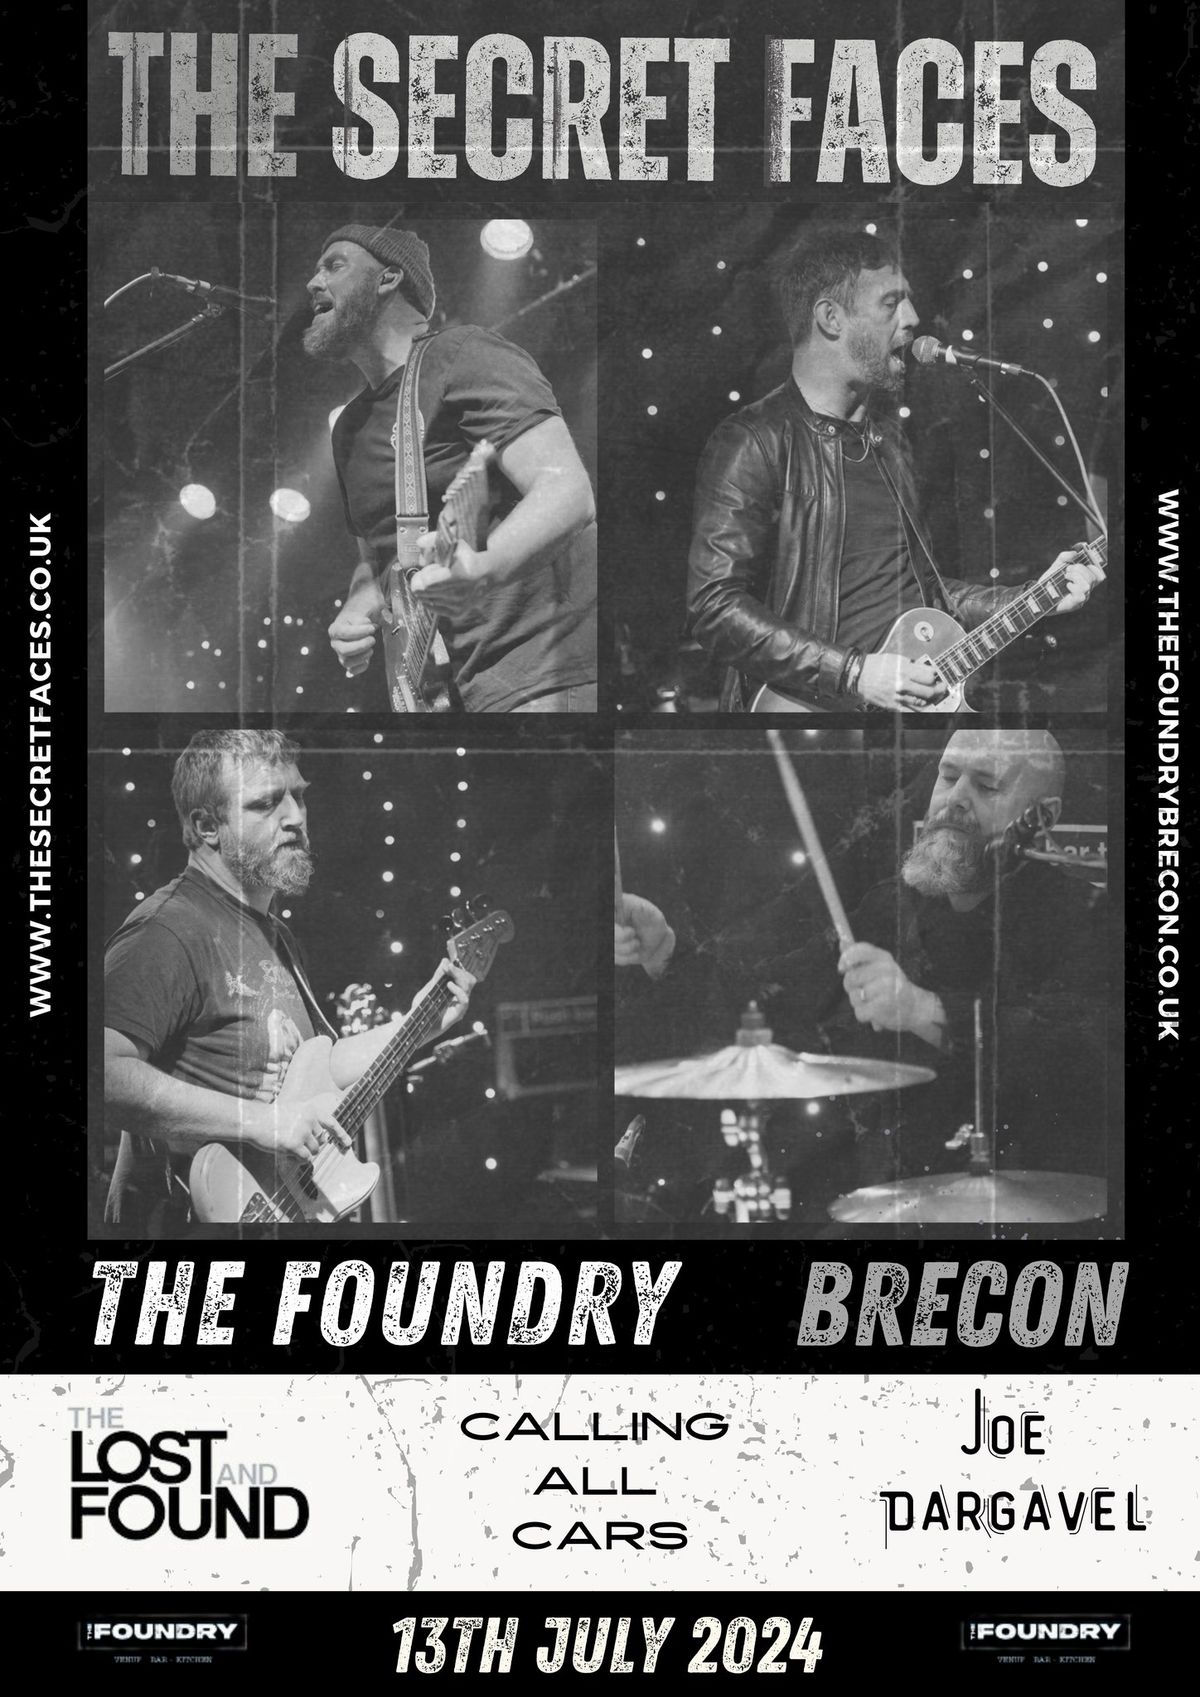 THE SECRET FACES\/THE LOST & FOUND \/CALLING ALL CARS\/ JOE DARGAVEL THE FOUNDRY - BRECON